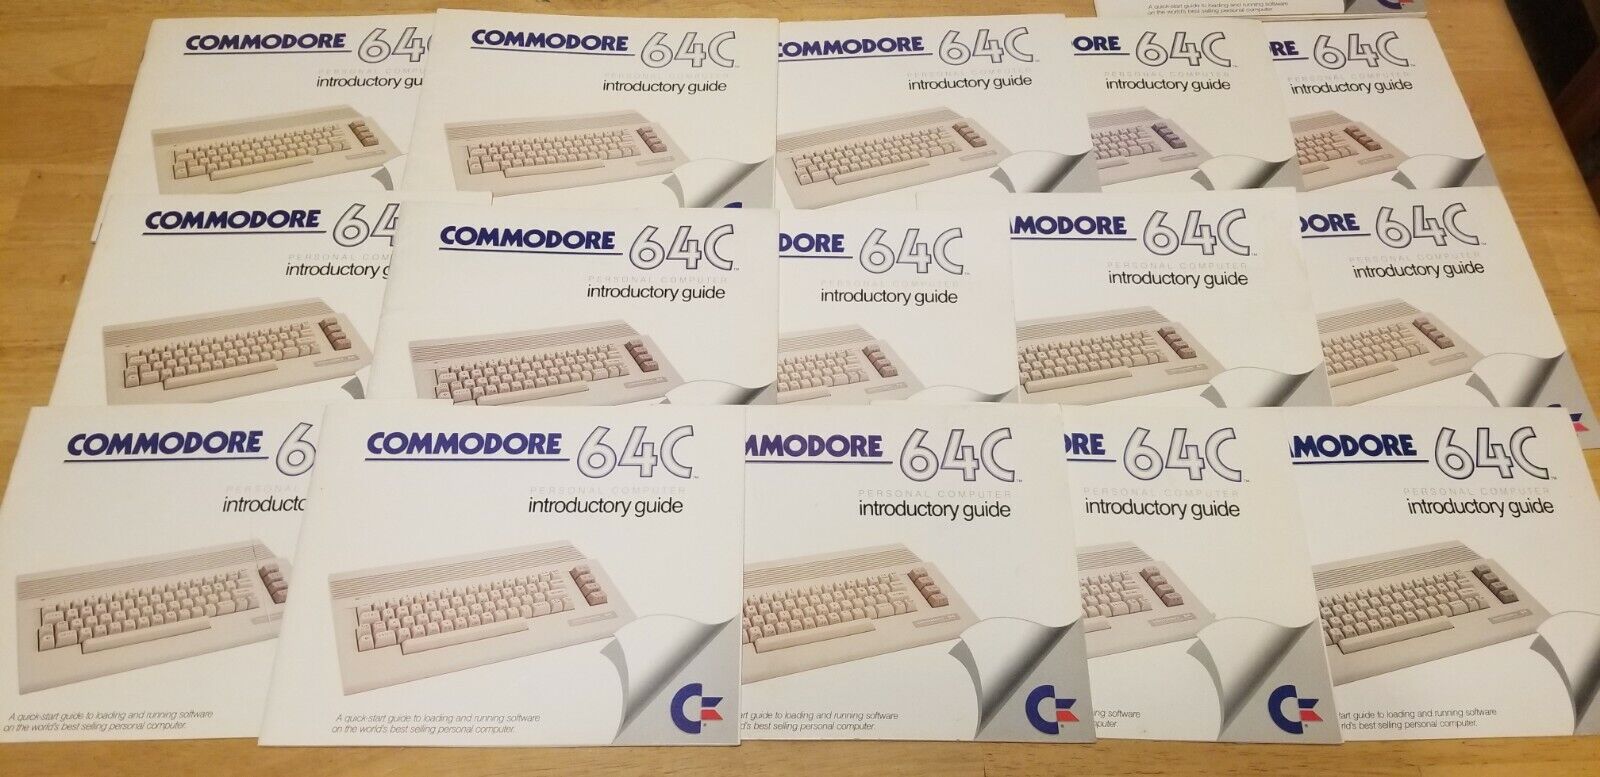 COMMODORE 64C personal computer introductory guide 